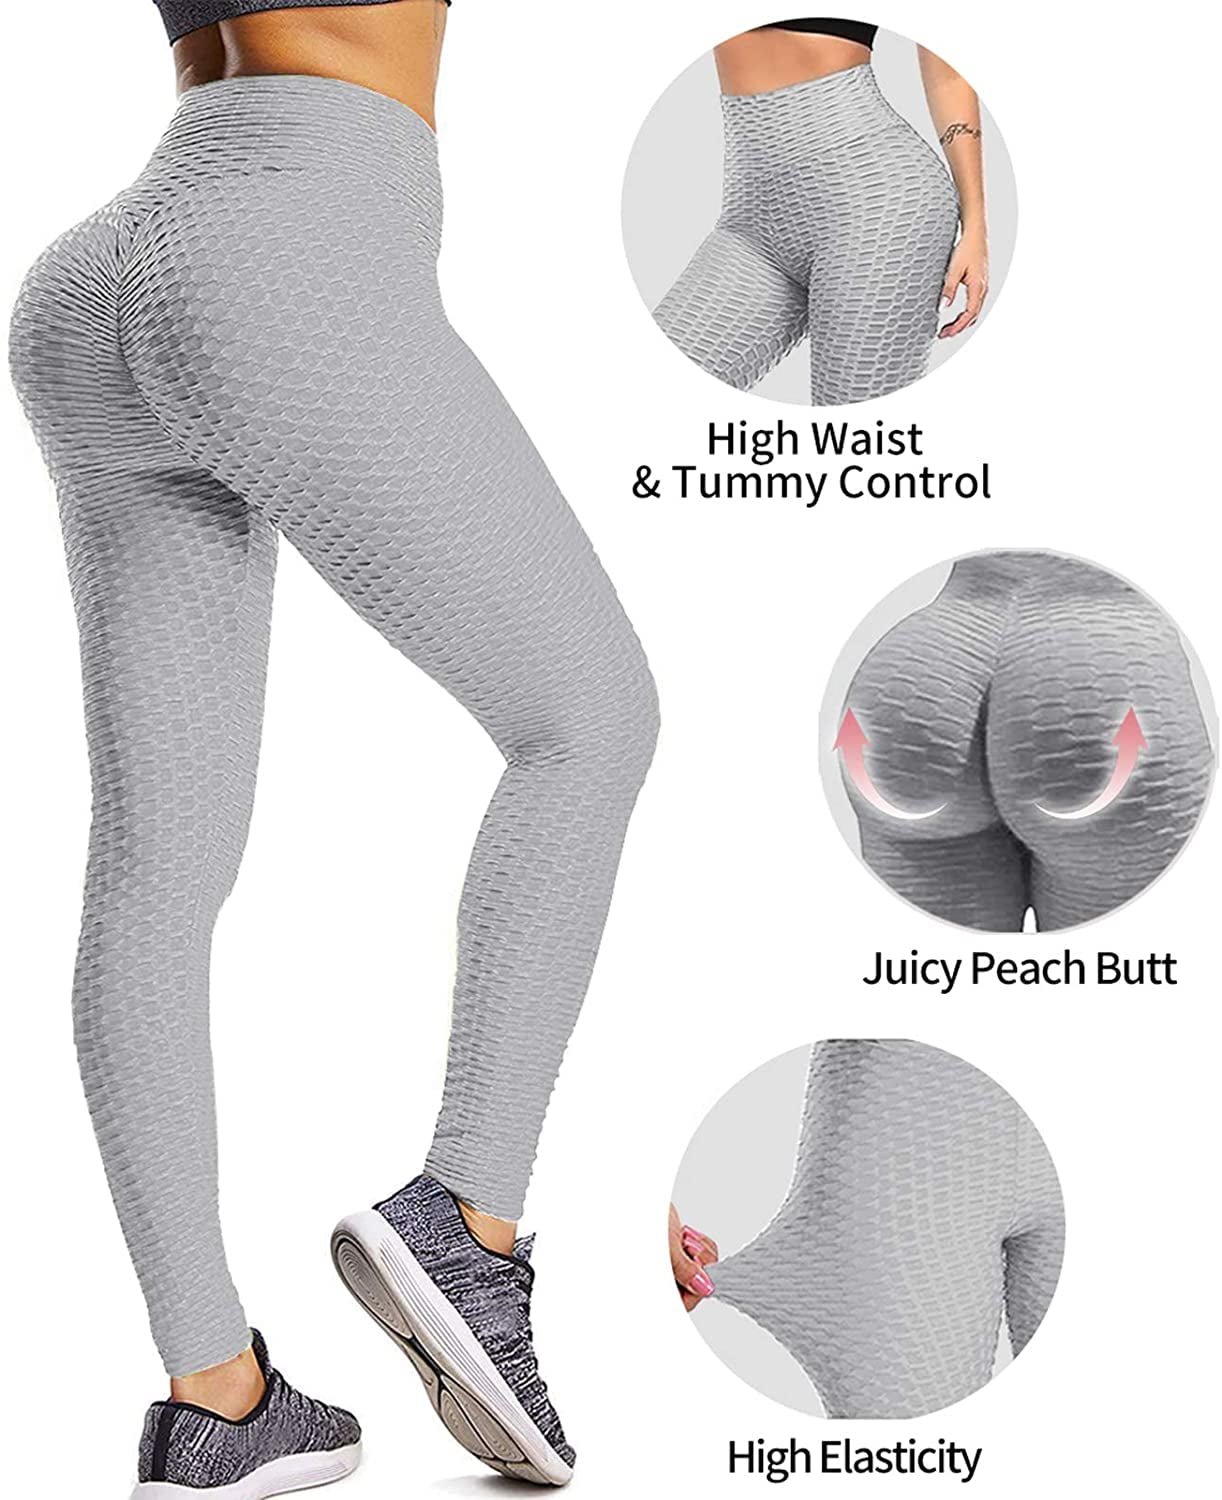 Womens High Waist Yoga Pants Tummy Control Slimming Booty Leggings Workout  Running Butt Lift Tights With Pockets Tights women cargo pants 